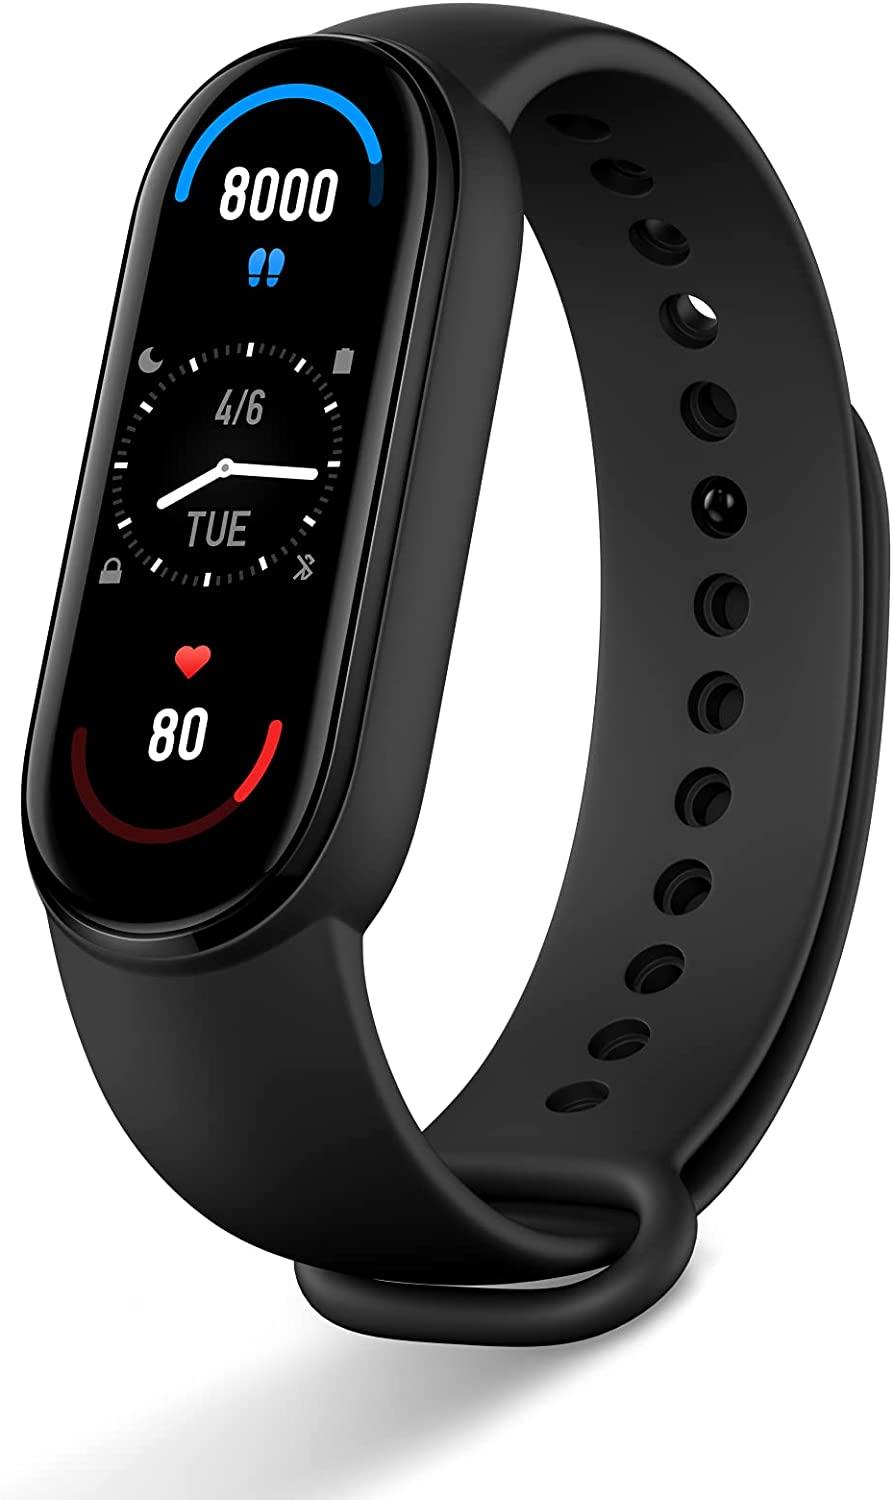  Xiaomi Mi Smart Band 6 40% Larger 1.56'' AMOLED Touch Screen,  Sleep Breathing Tracking, 5ATM Water Resistant, 14 Days Battery Life, 30  Sports Mode, Fitness, Steps, Sleep, Heart Rate Monitor : Sports & Outdoors